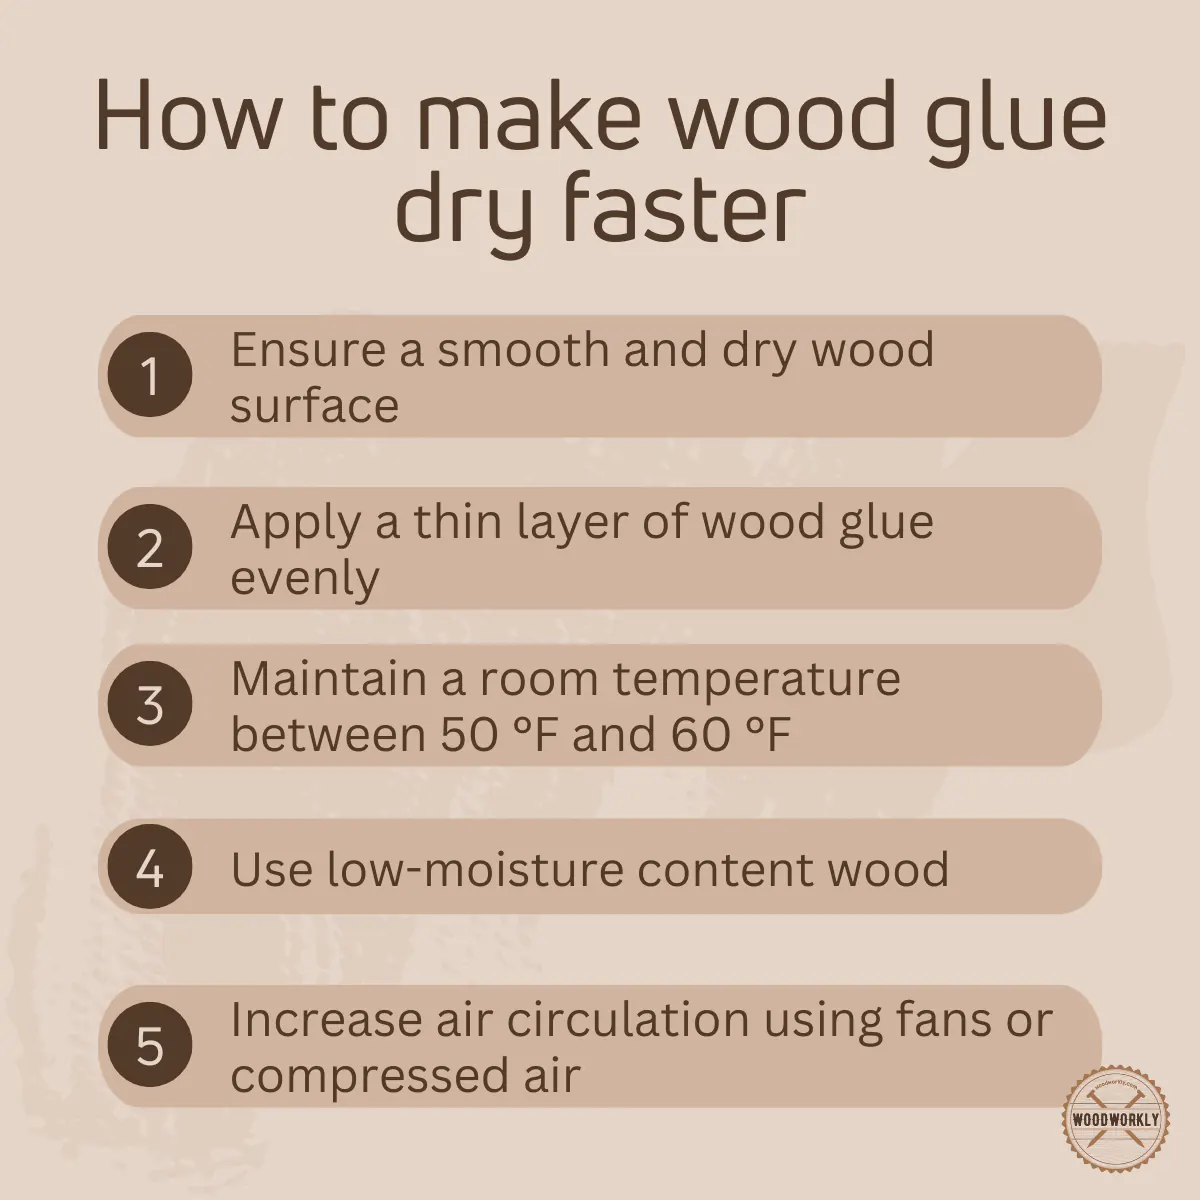 How to make wood glue dry faster